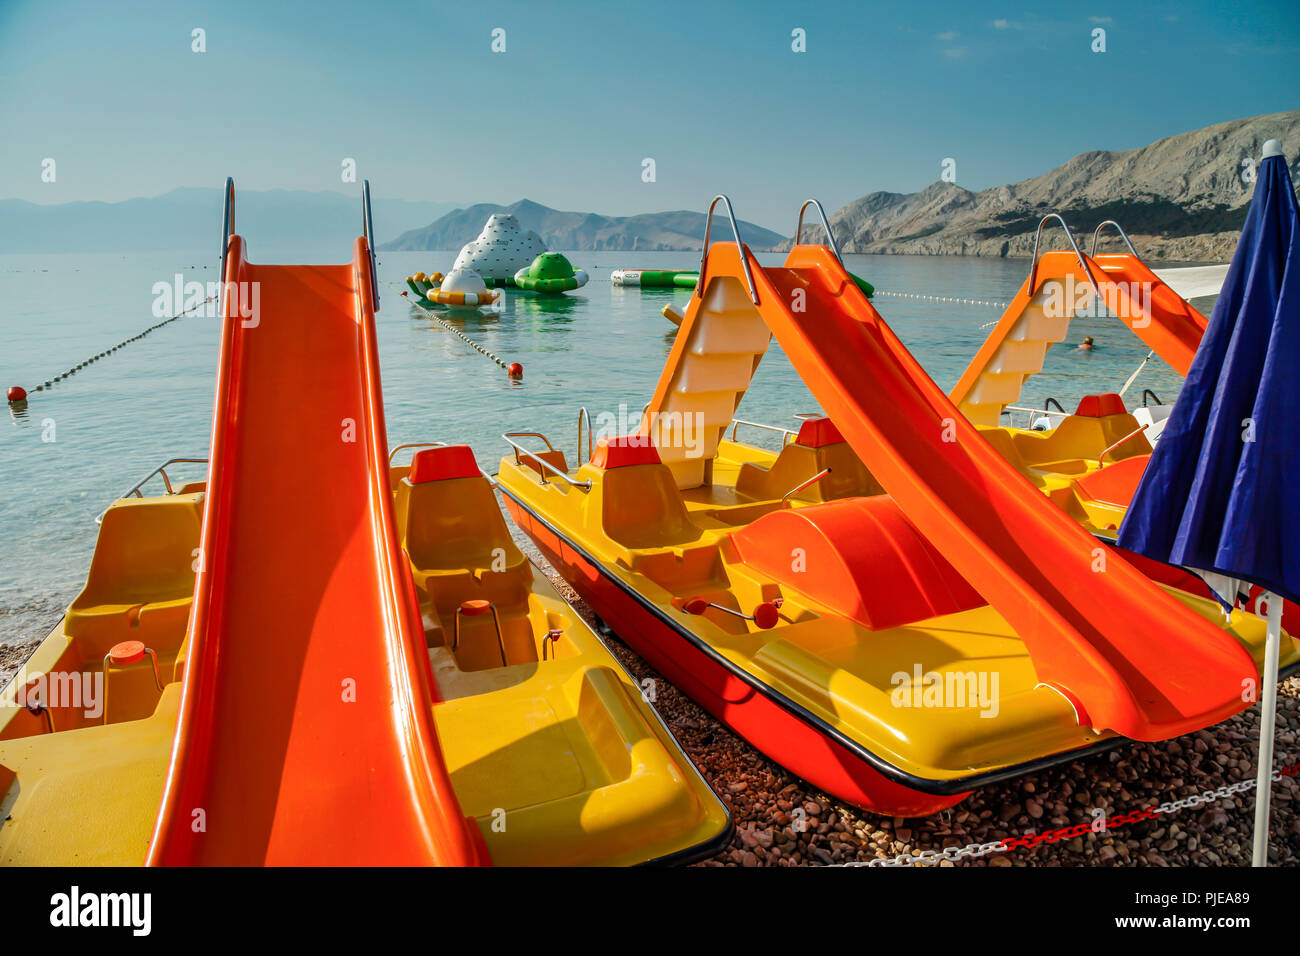 Beach slides and water sport toys at Baska resort on the Croatian island of Krk in the Adriatic Stock Photo